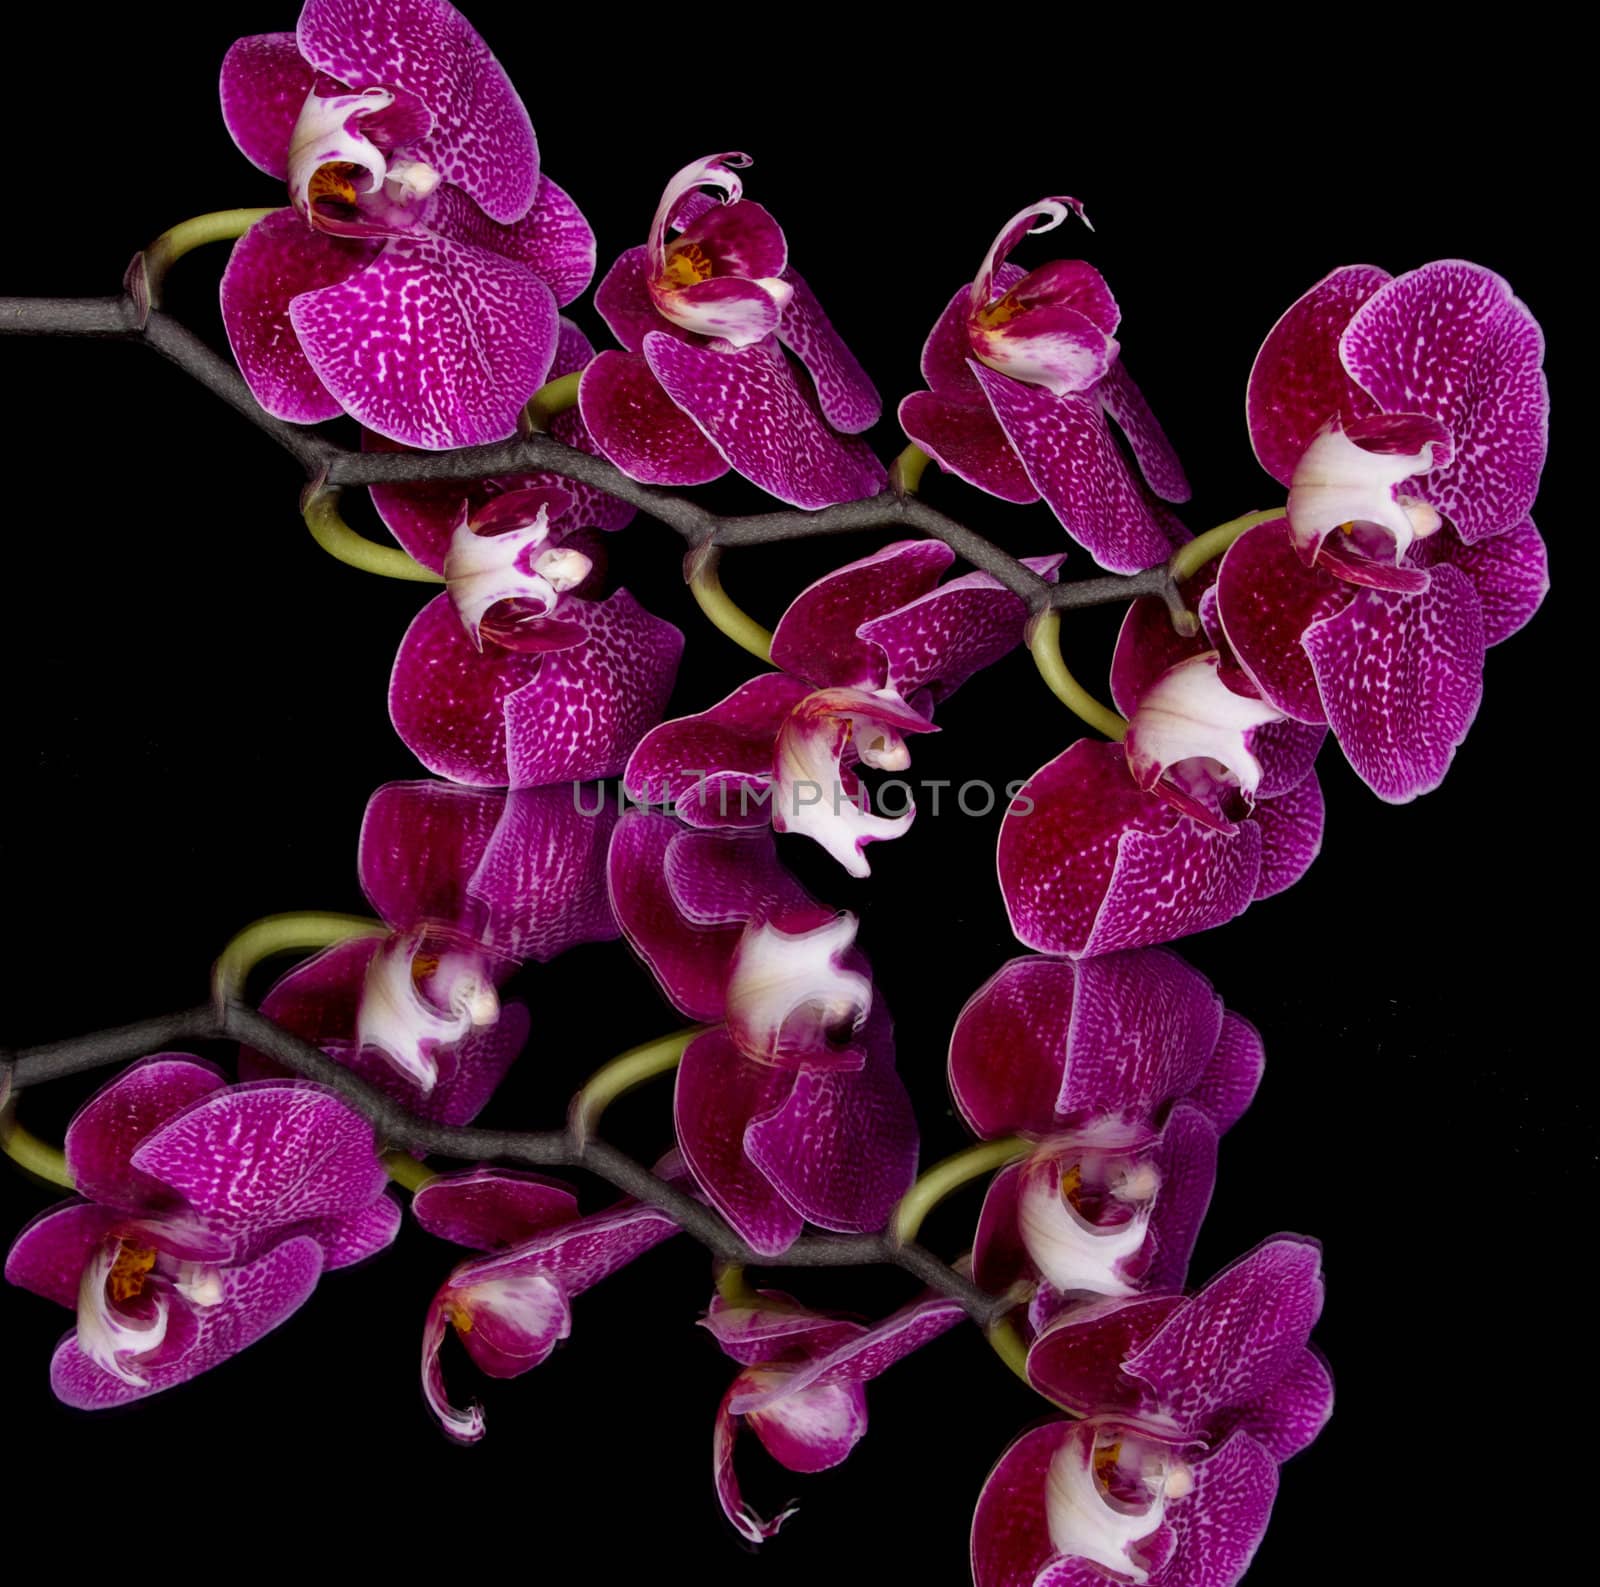 Pink & White Orchids On Black Background by cvalle